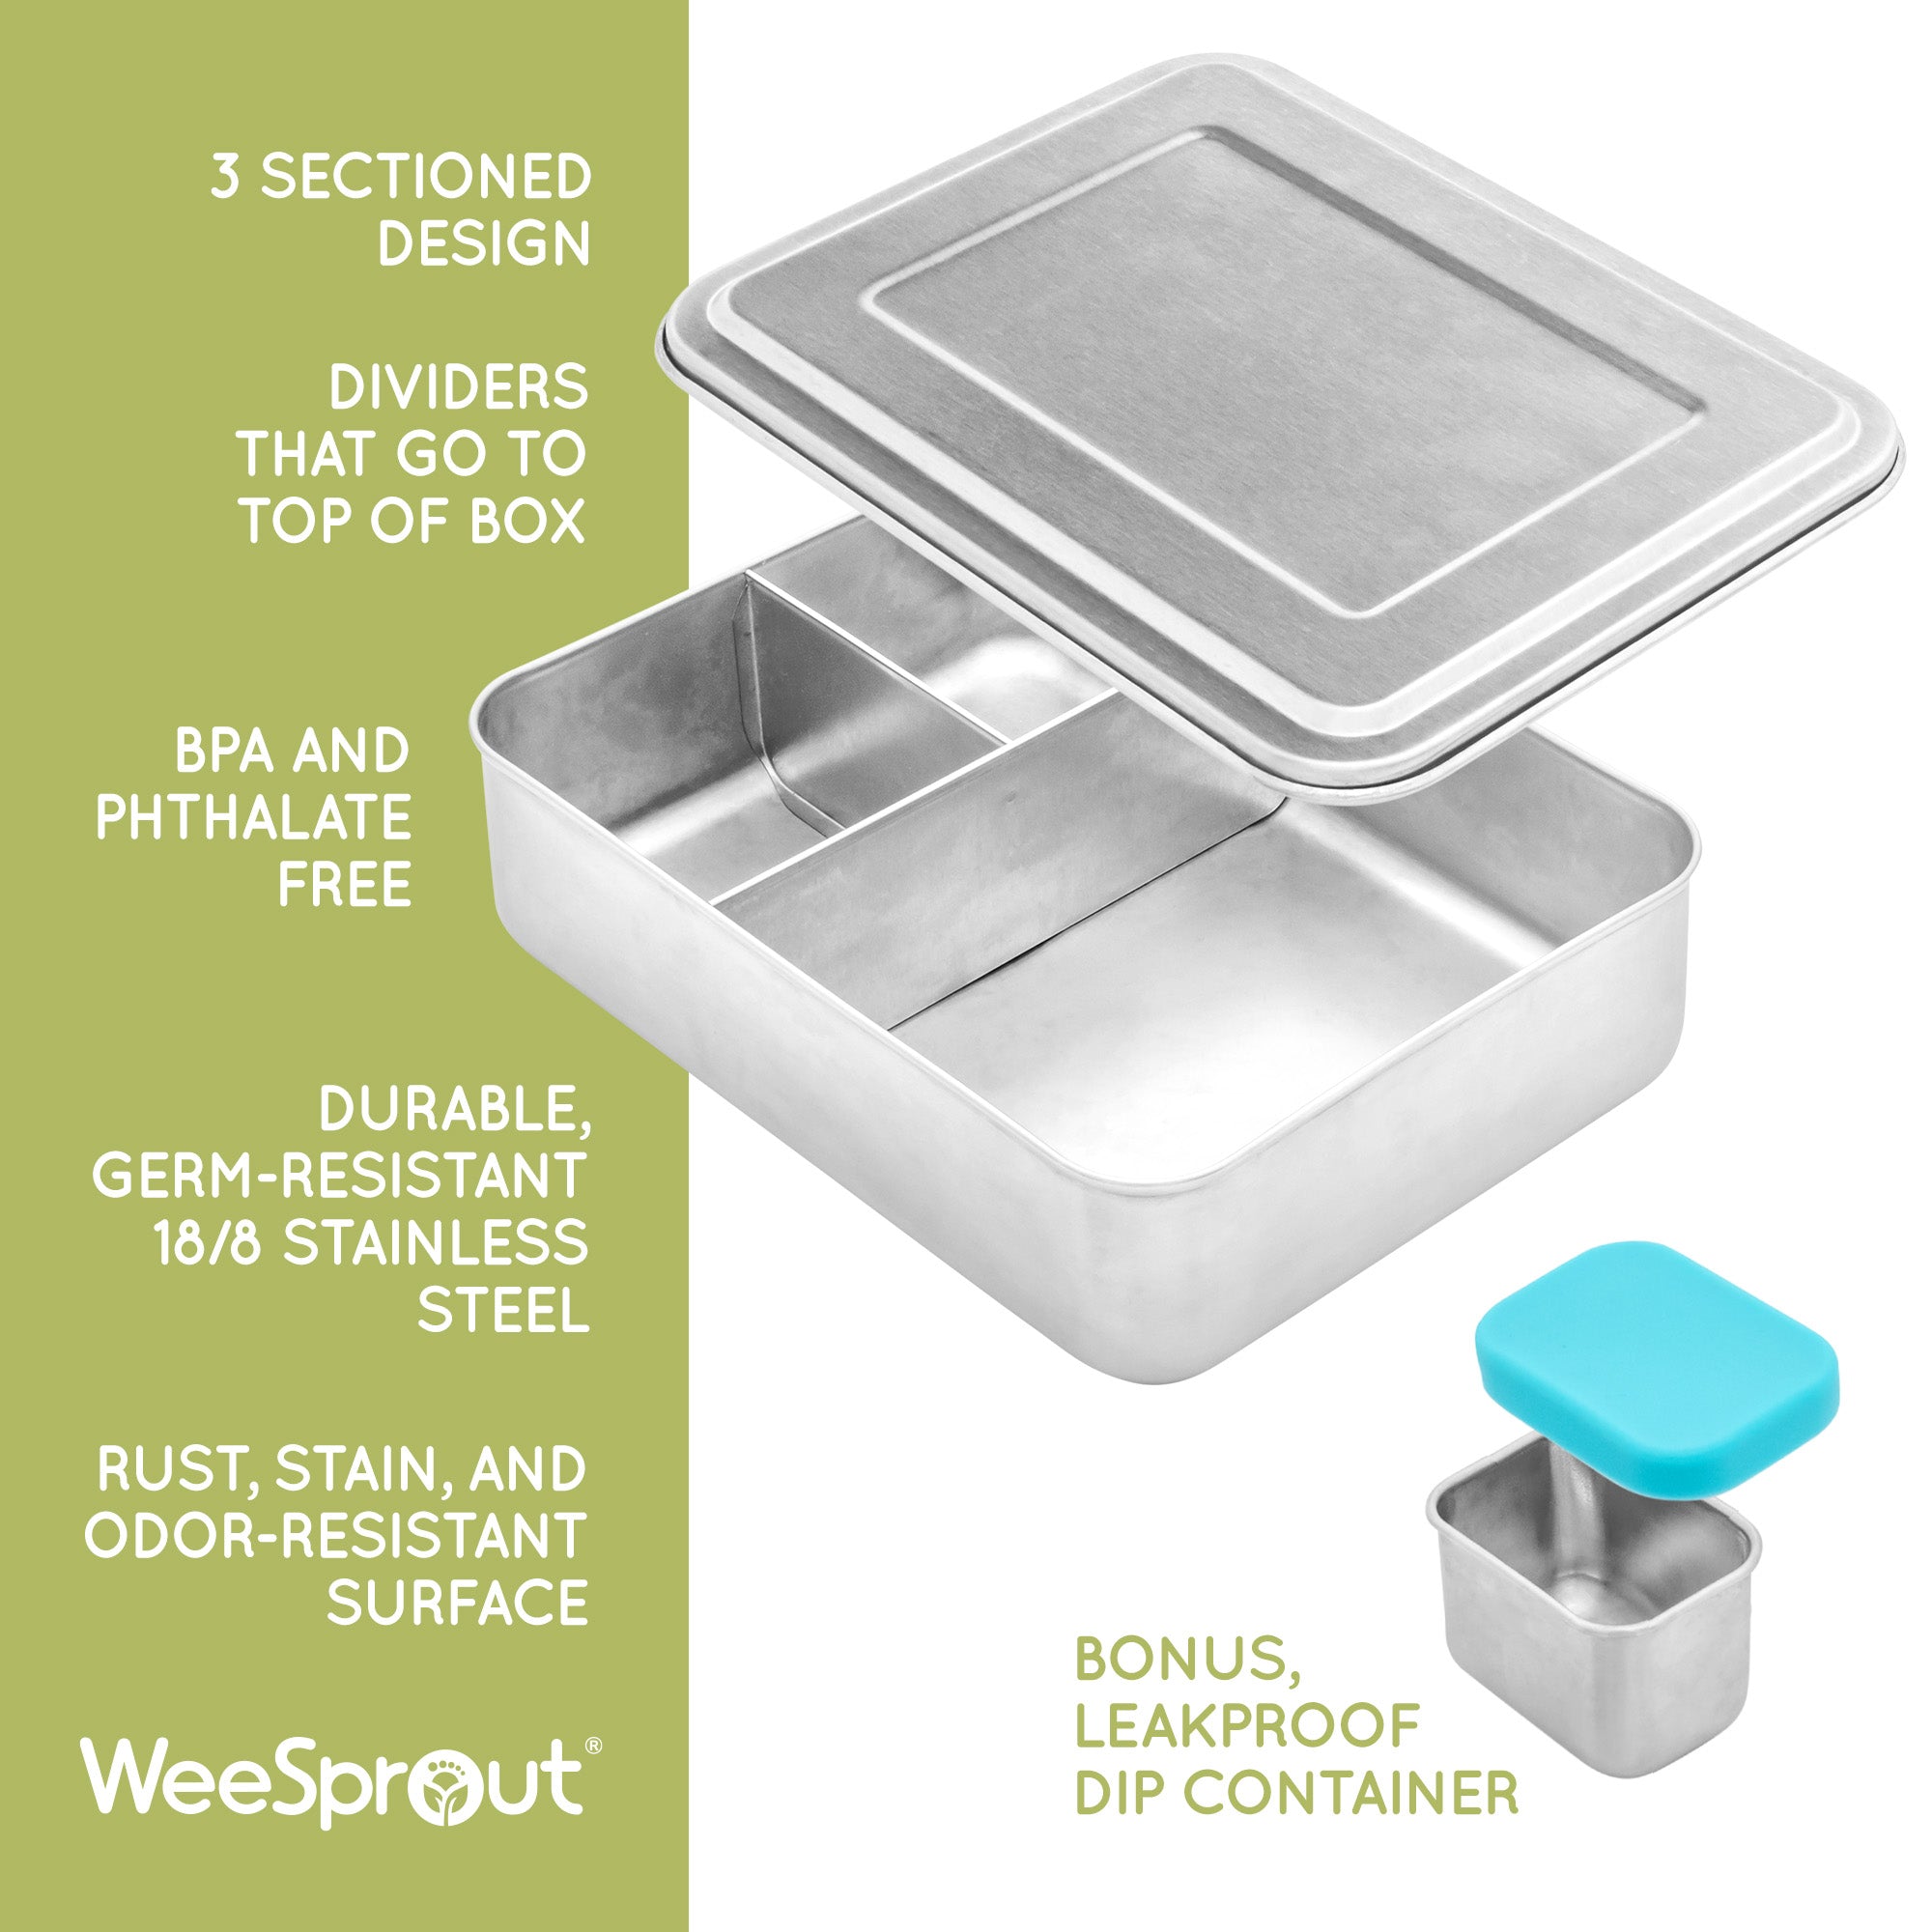 WeeSprout 18/8 Stainless Steel Bento Box (Compact Lunch Box) - 3 Compartment Metal Lunch Containers, for Kids & Adults, Bonus